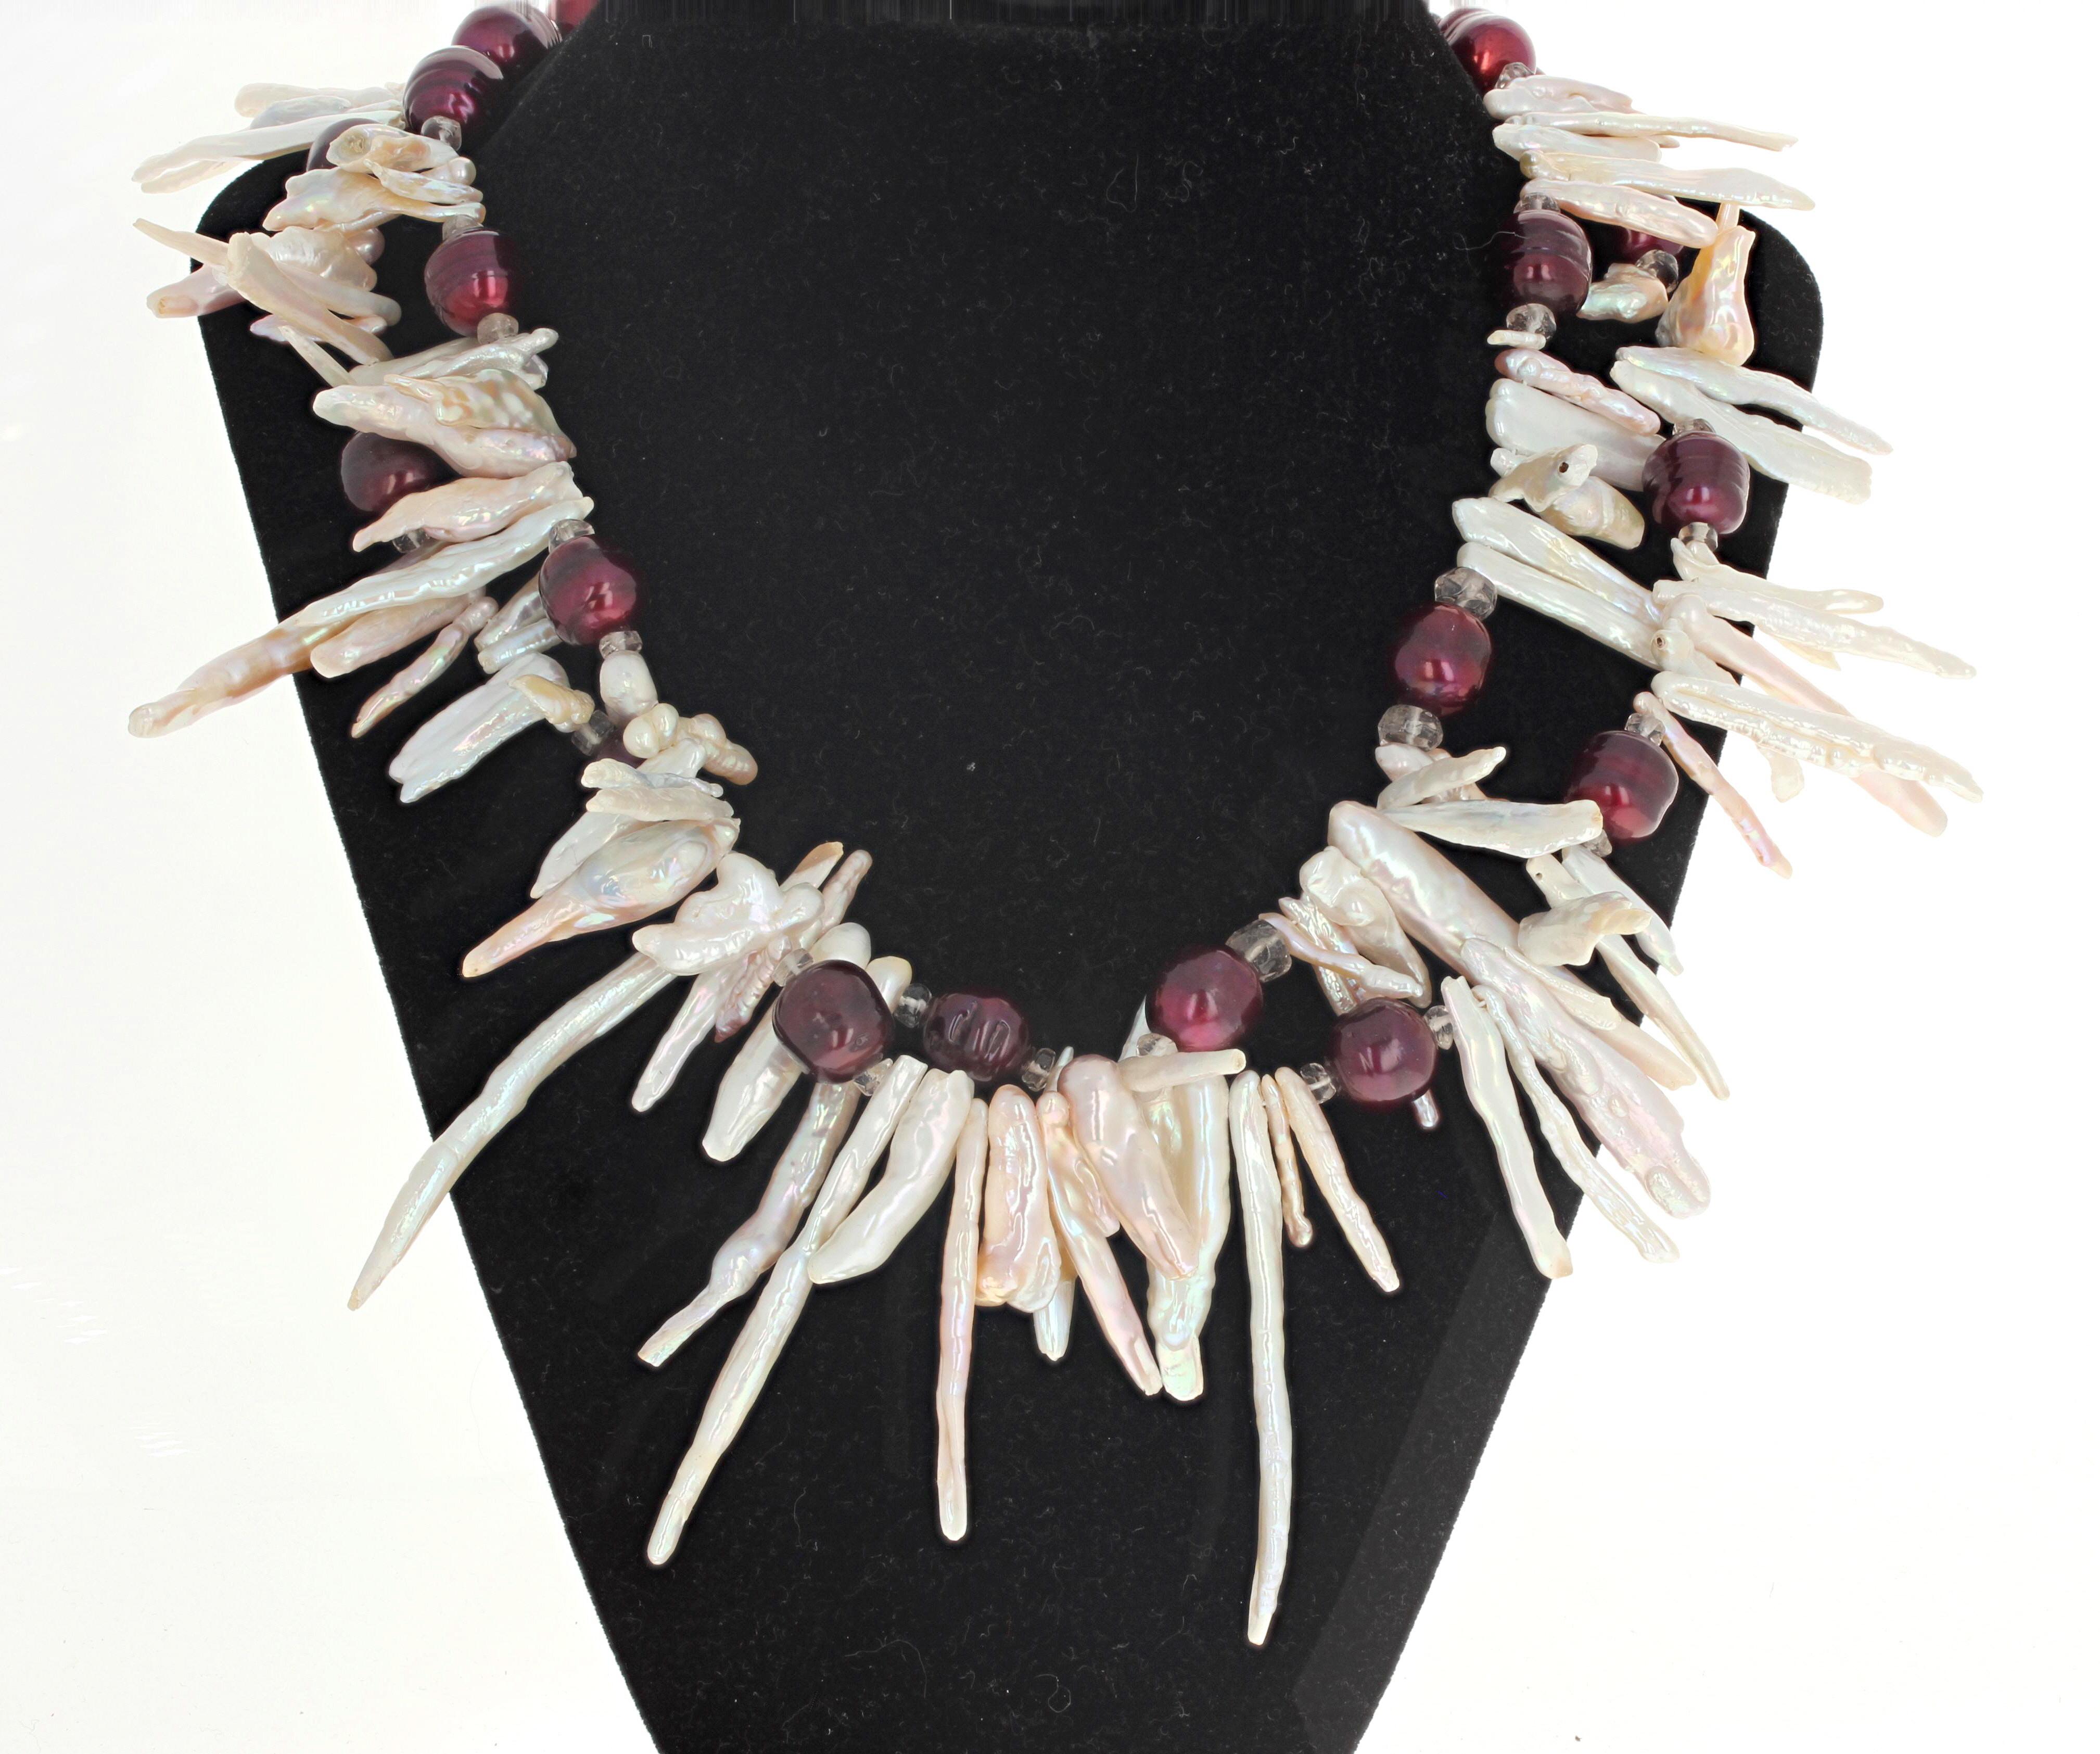 This double strand of really dramatic necklace is 18 inches long. It is natural real white Pearl leaves enhanced with round burgundy color real cultured Pearls.  The longest 